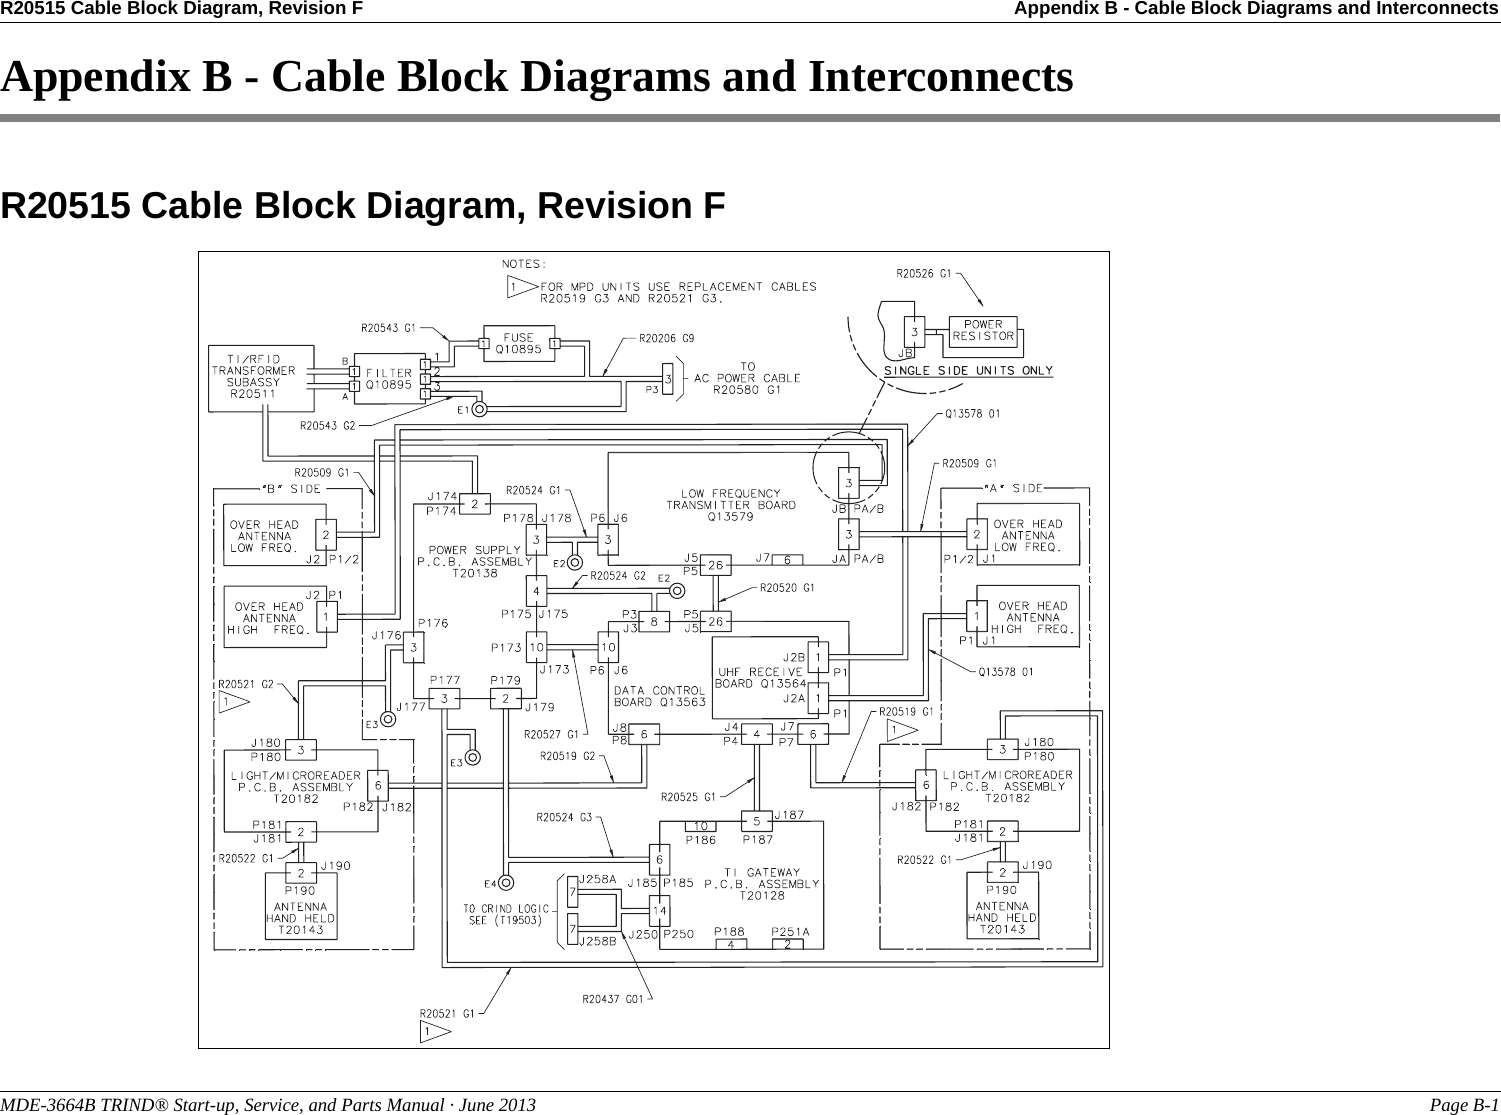 R20515 Cable Block Diagram, Revision F Appendix B - Cable Block Diagrams and InterconnectsMDE-3664B TRIND® Start-up, Service, and Parts Manual · June 2013 Page B-1Appendix B - Cable Block Diagrams and InterconnectsR20515 Cable Block Diagram, Revision F